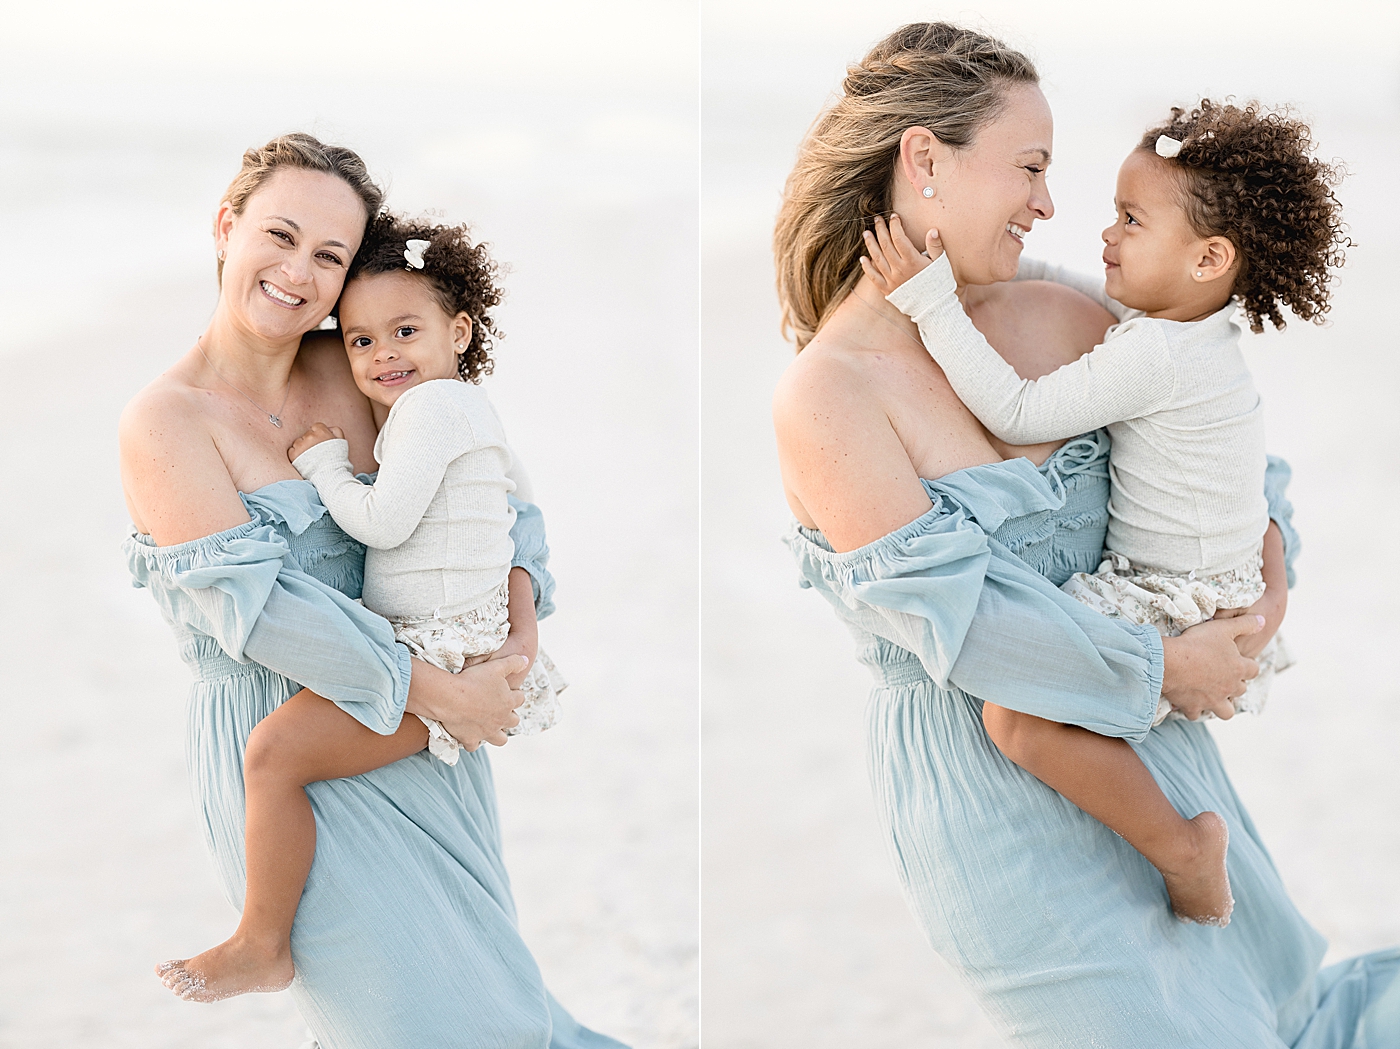 Mom and toddler-age daughter on the beach for photos with Brittany Elise Photography.